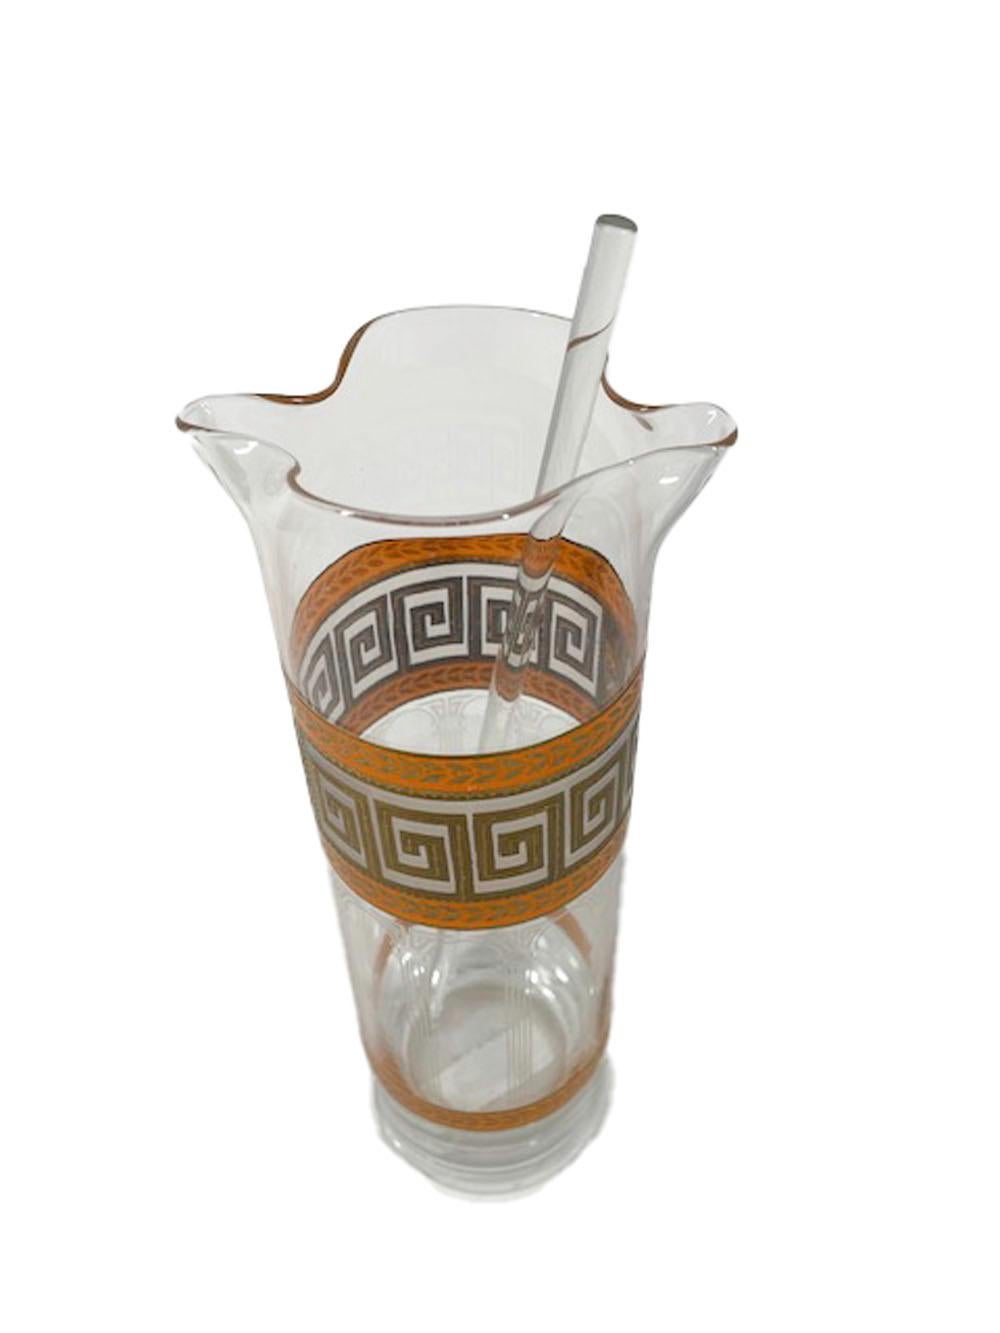 Glass Culver Cocktail Pitcher & Roly Poly Set in Orange and Gold Greek Key Pattern